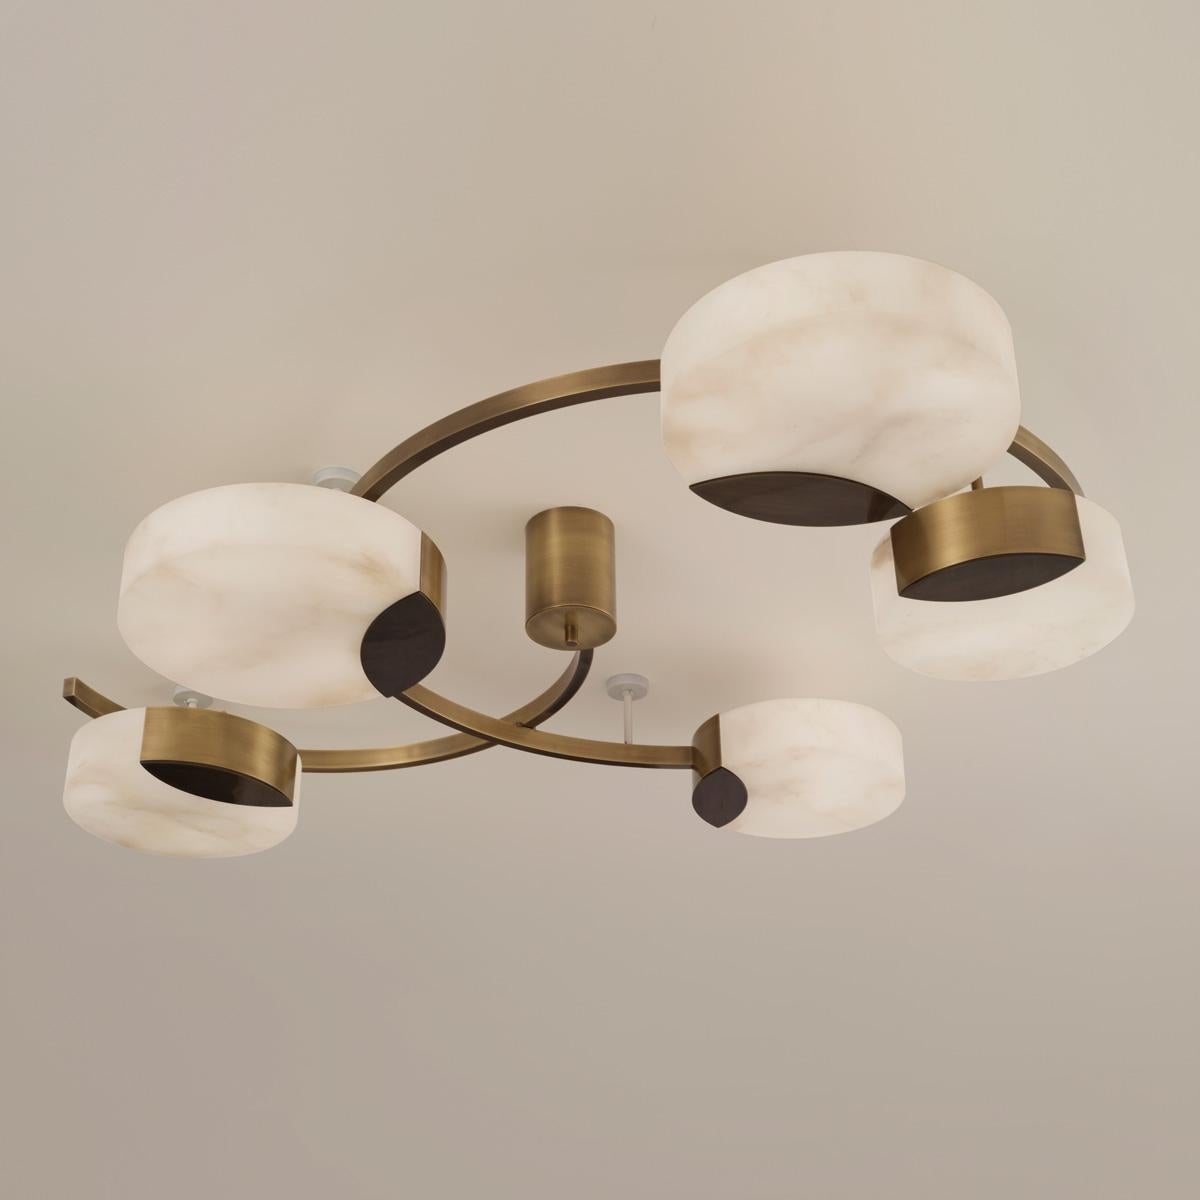 Cloud N.5 Ceiling Light by Gaspare Asaro-Satin Brass Finish For Sale 1